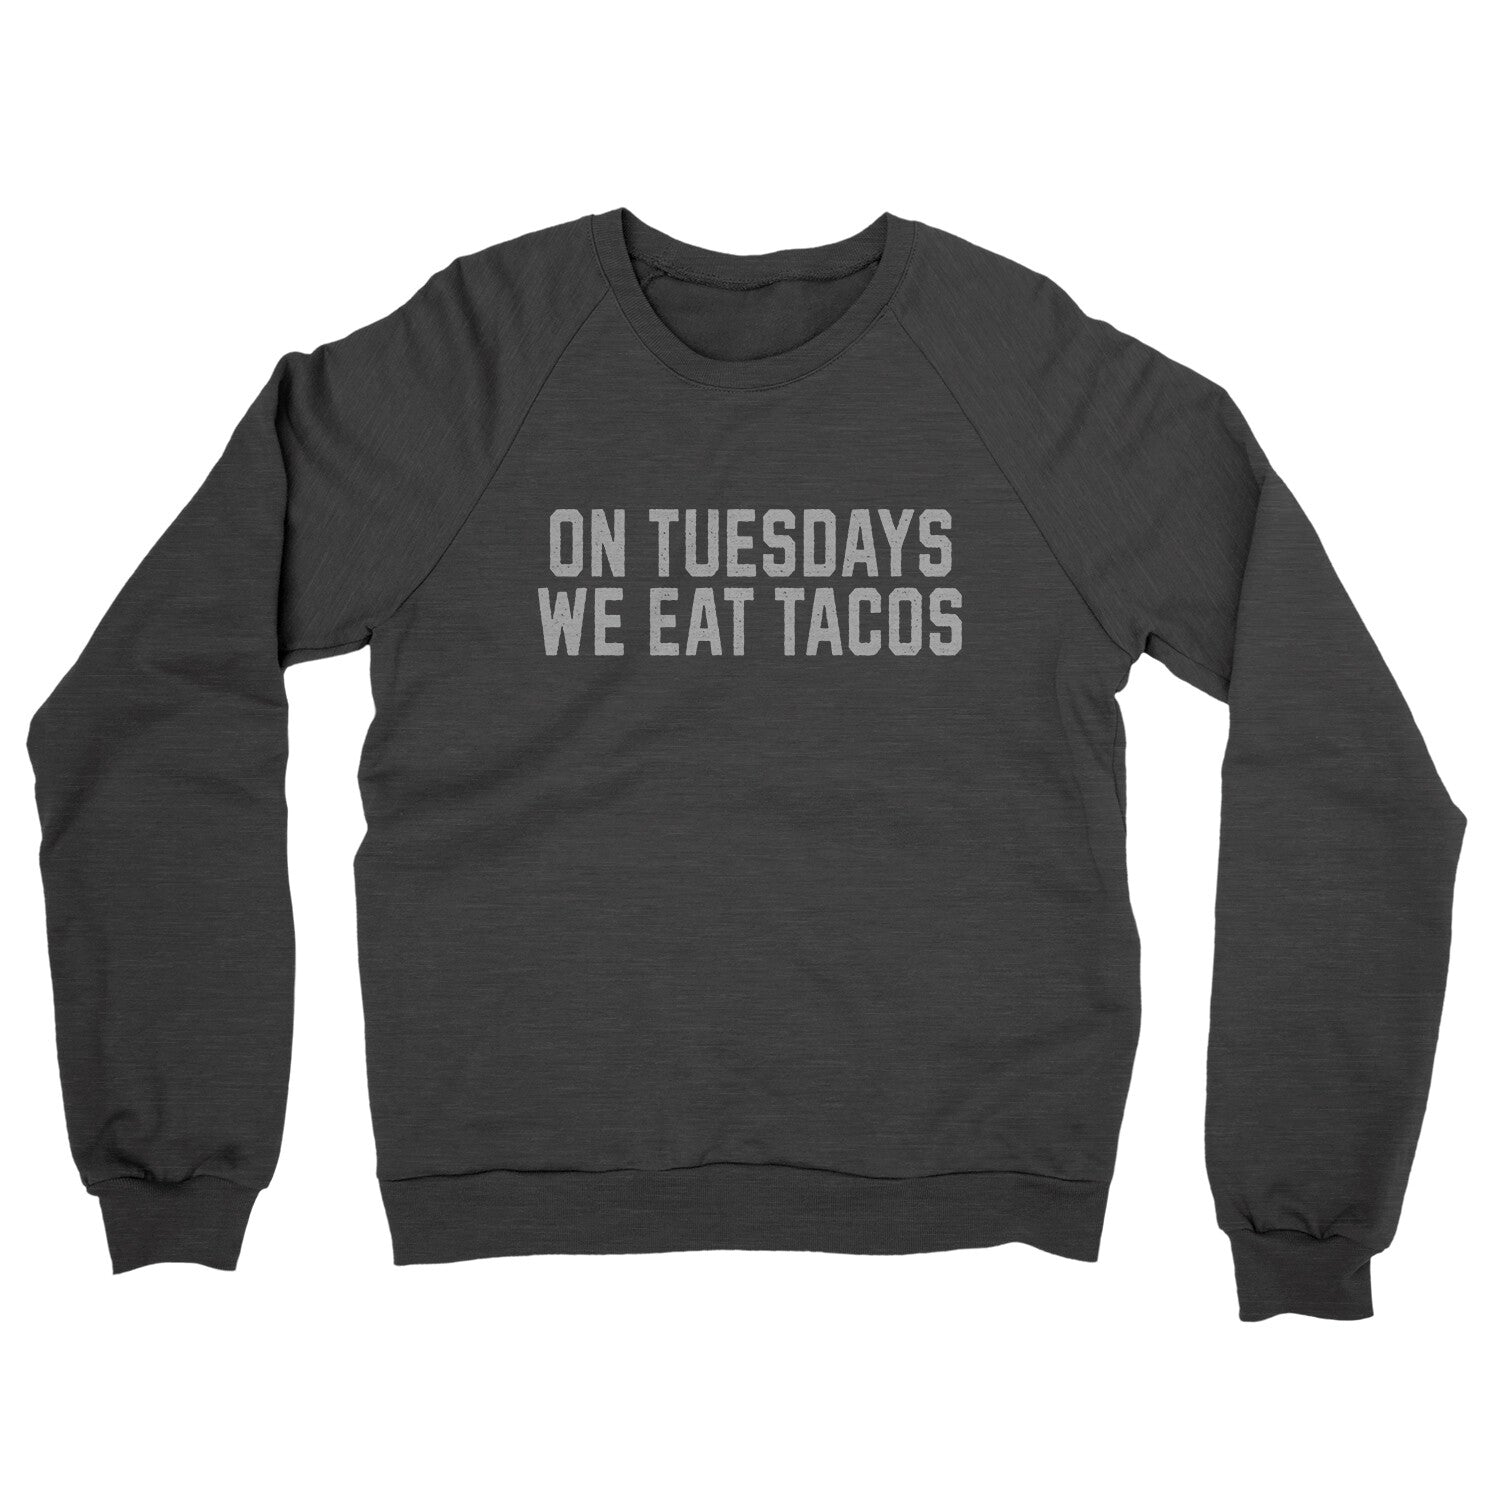 On Tuesdays We Eat Tacos in Charcoal Heather Color